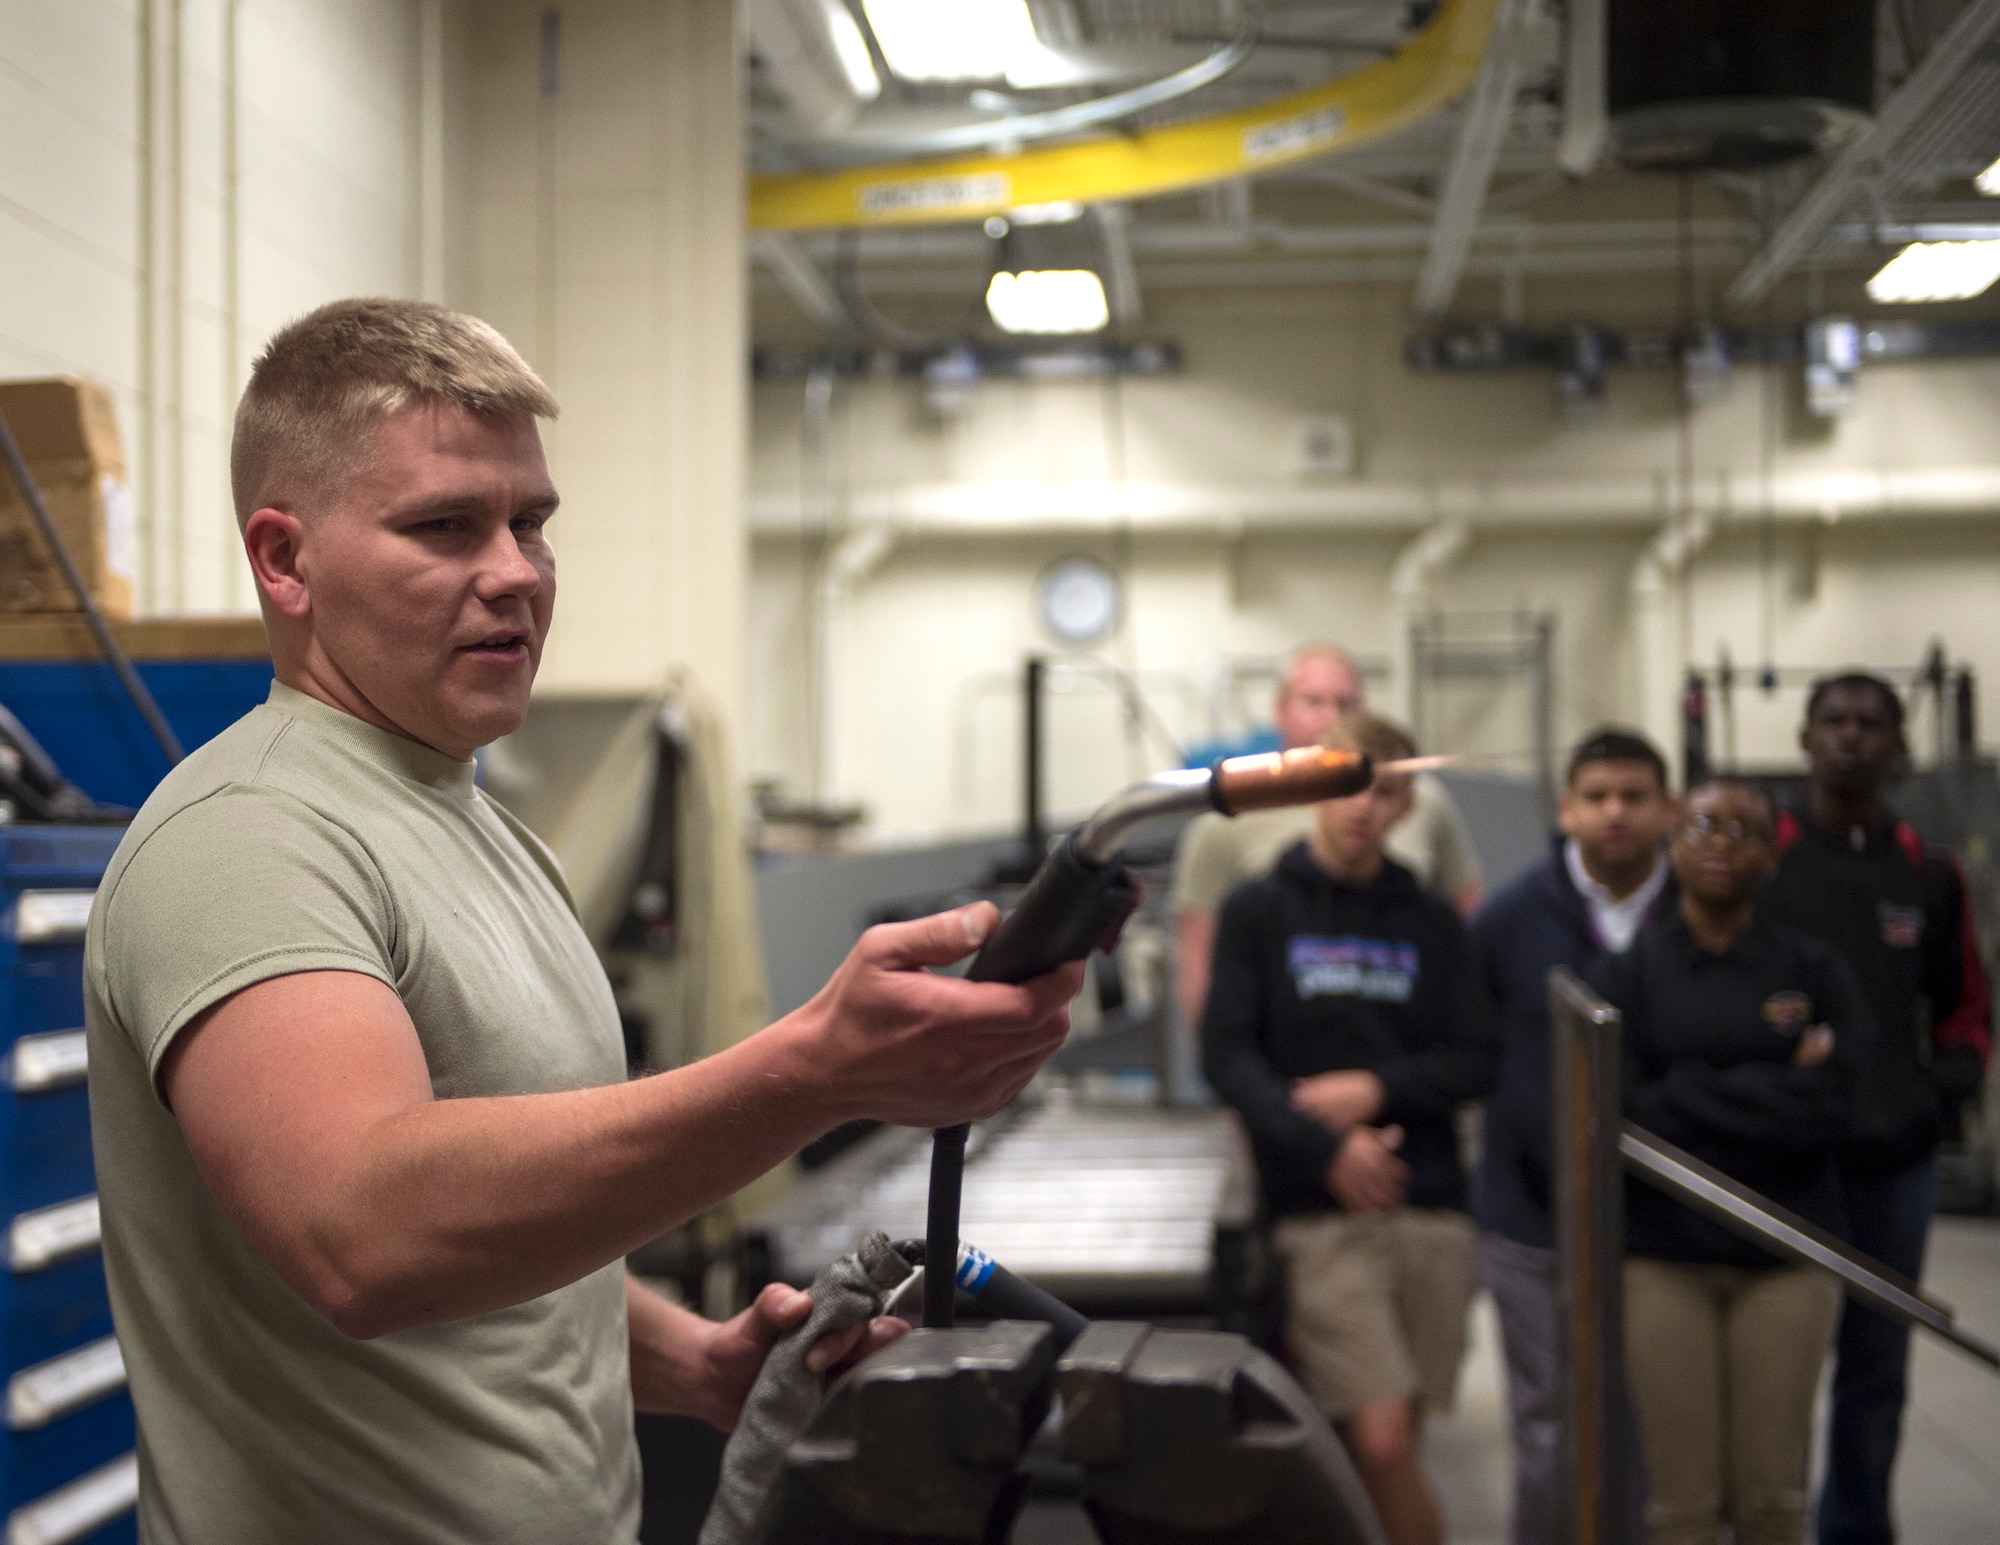 Members from five different Junior Reserve Officer Training Corp (JROTC) units visit the 133rd Airlift Wing on May 15, 2019.